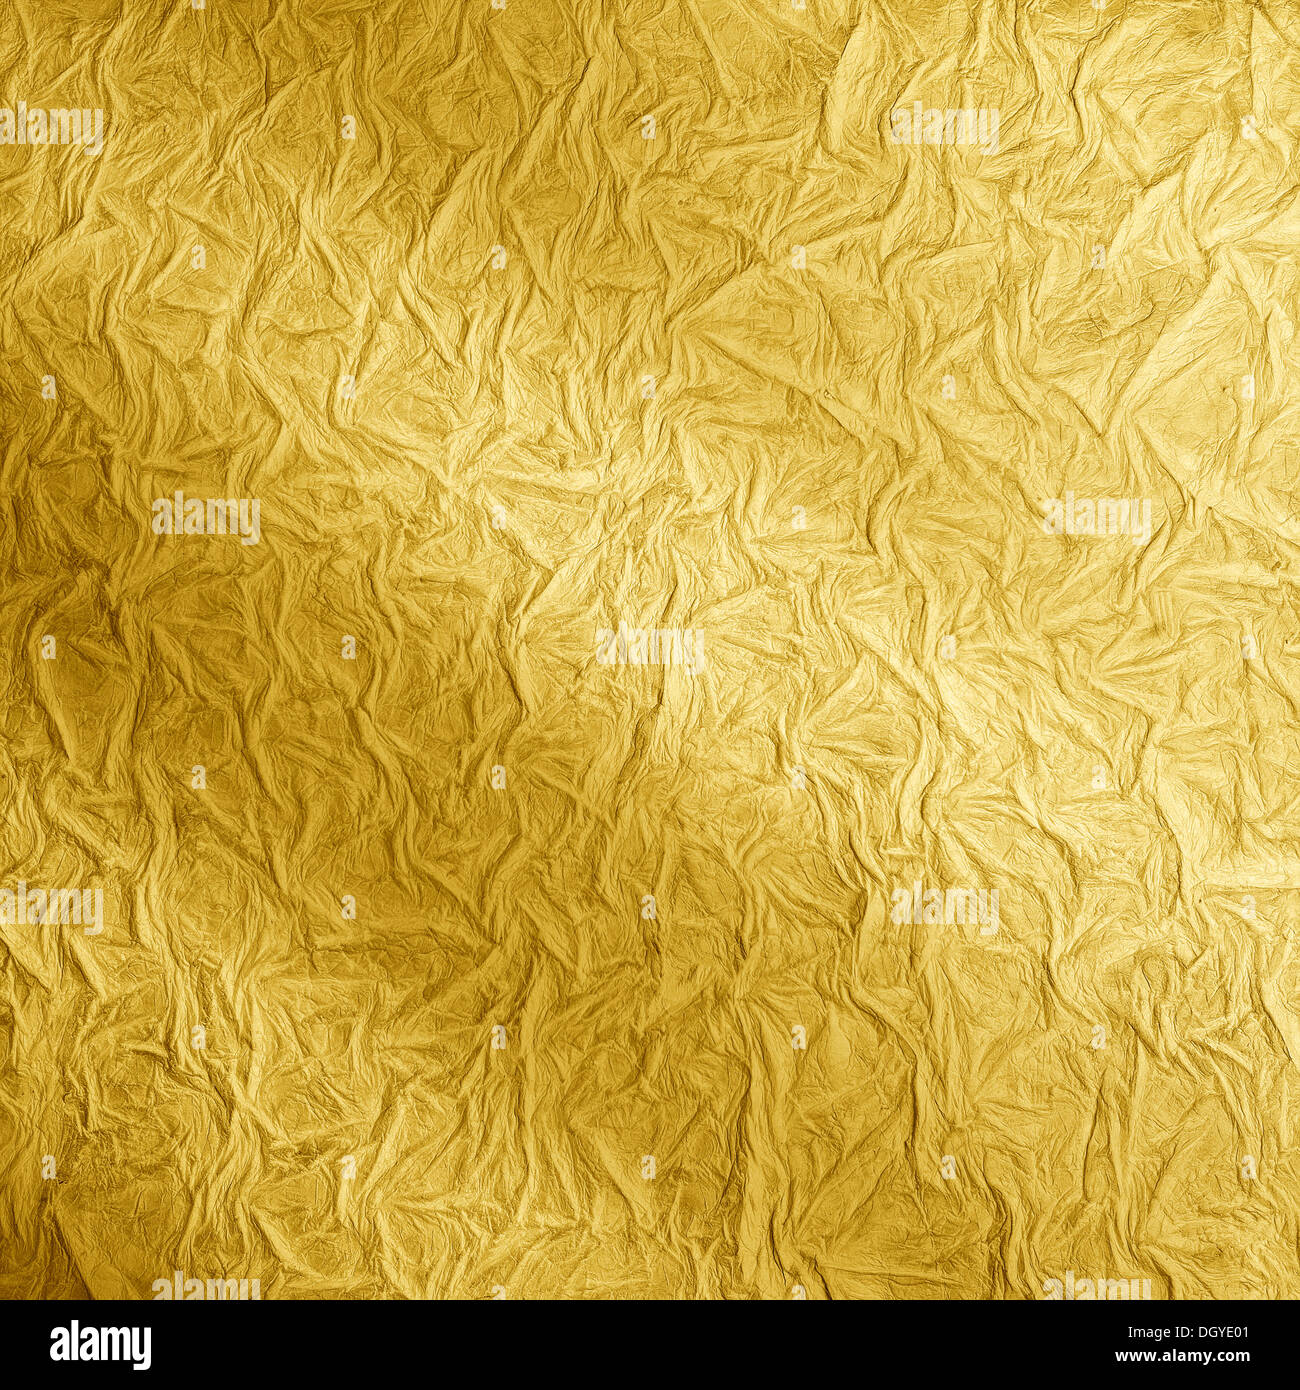 Golden tcolor background. Ragged surface texture Stock Photo